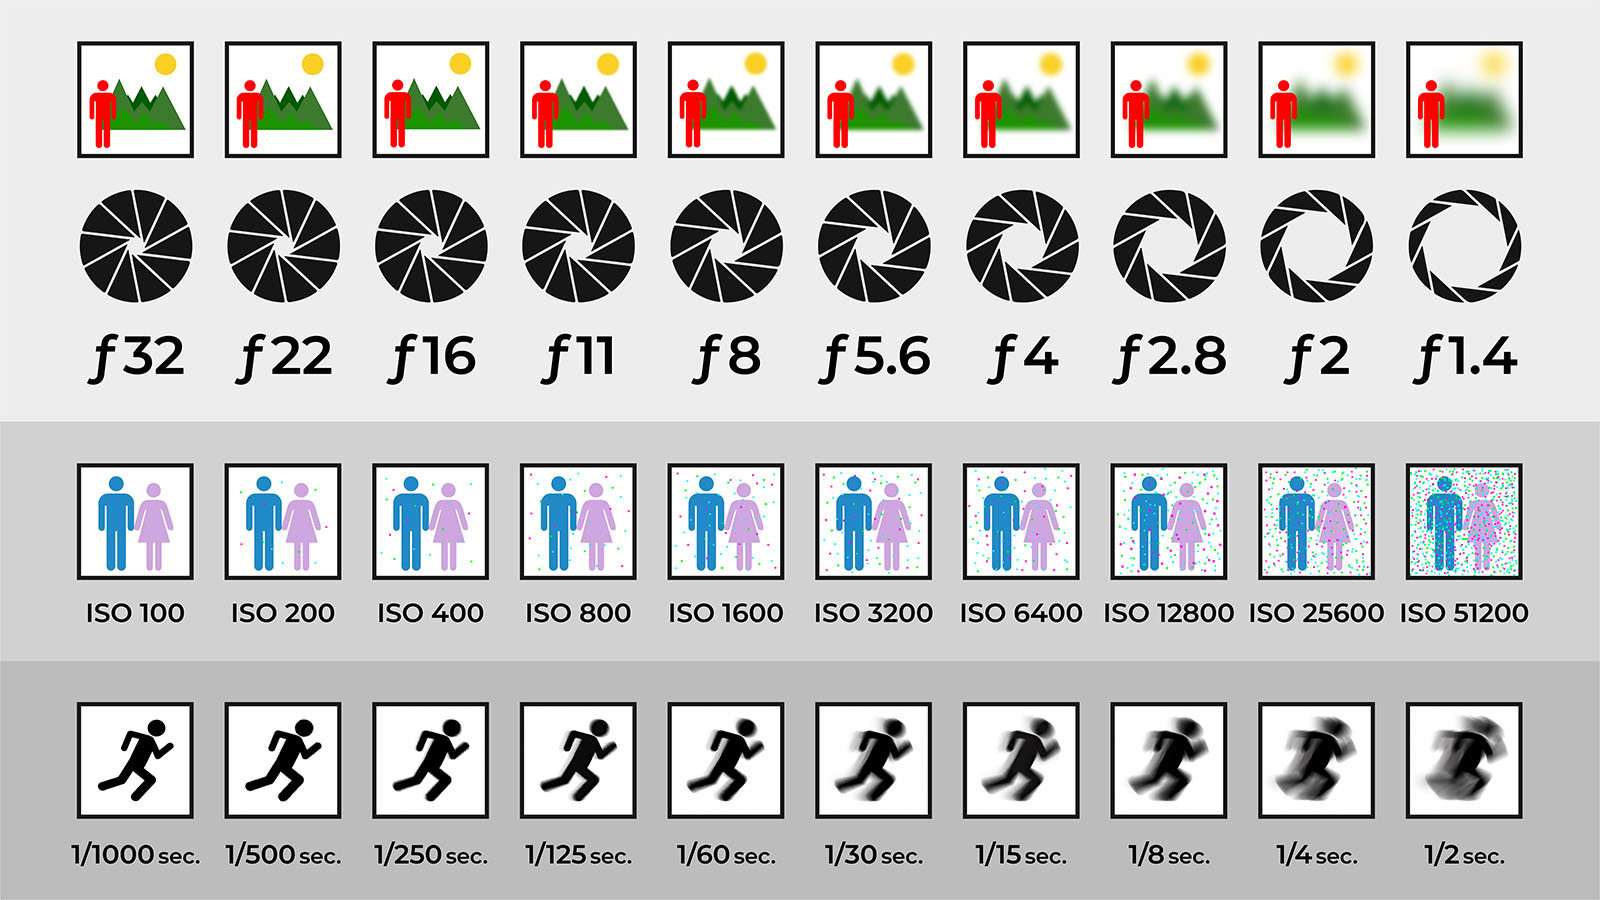 The Basics of Equivalent Exposure in Photography | PetaPixel